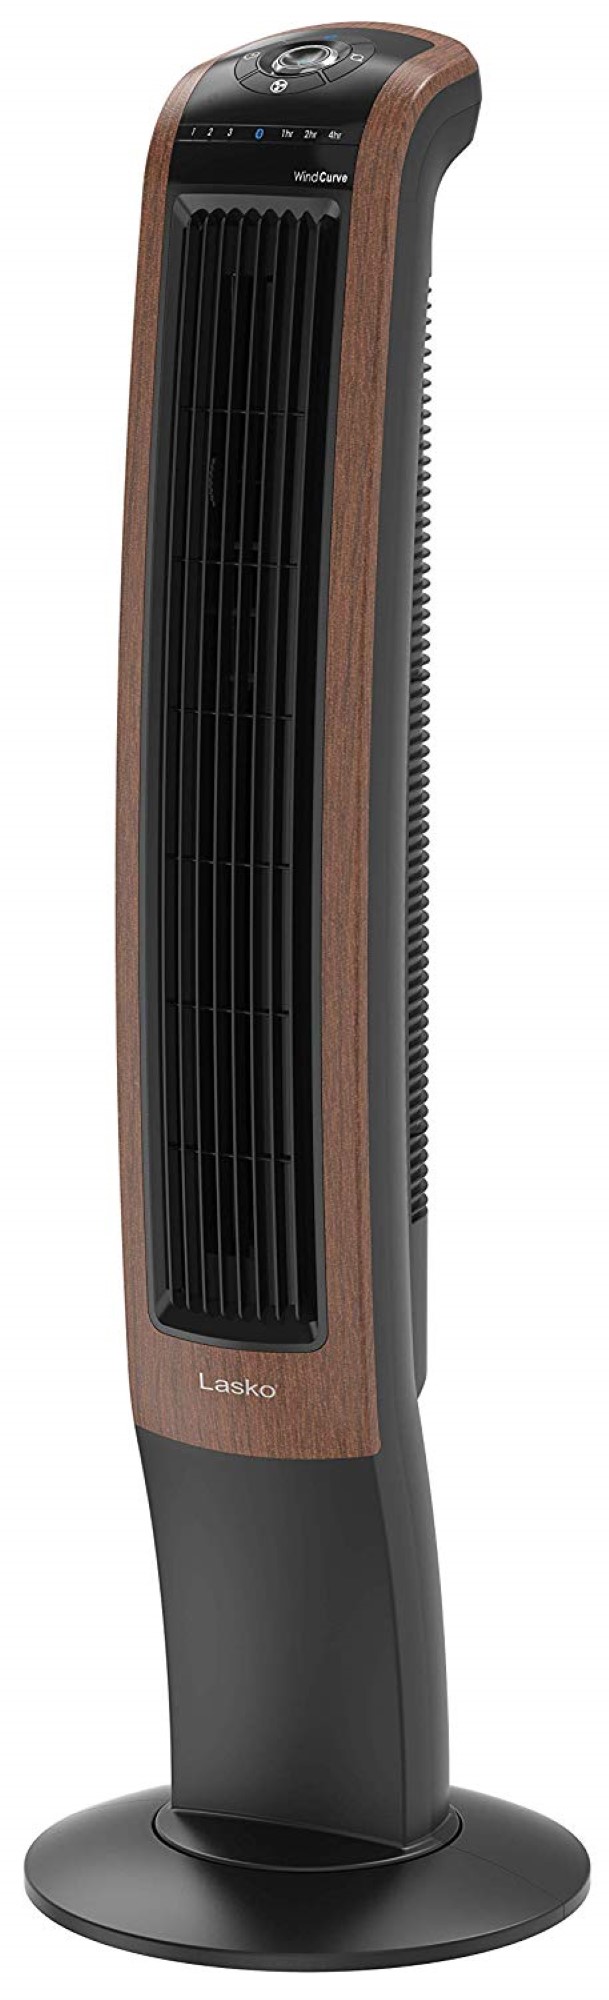 42" Tower Fan with Bluetooth